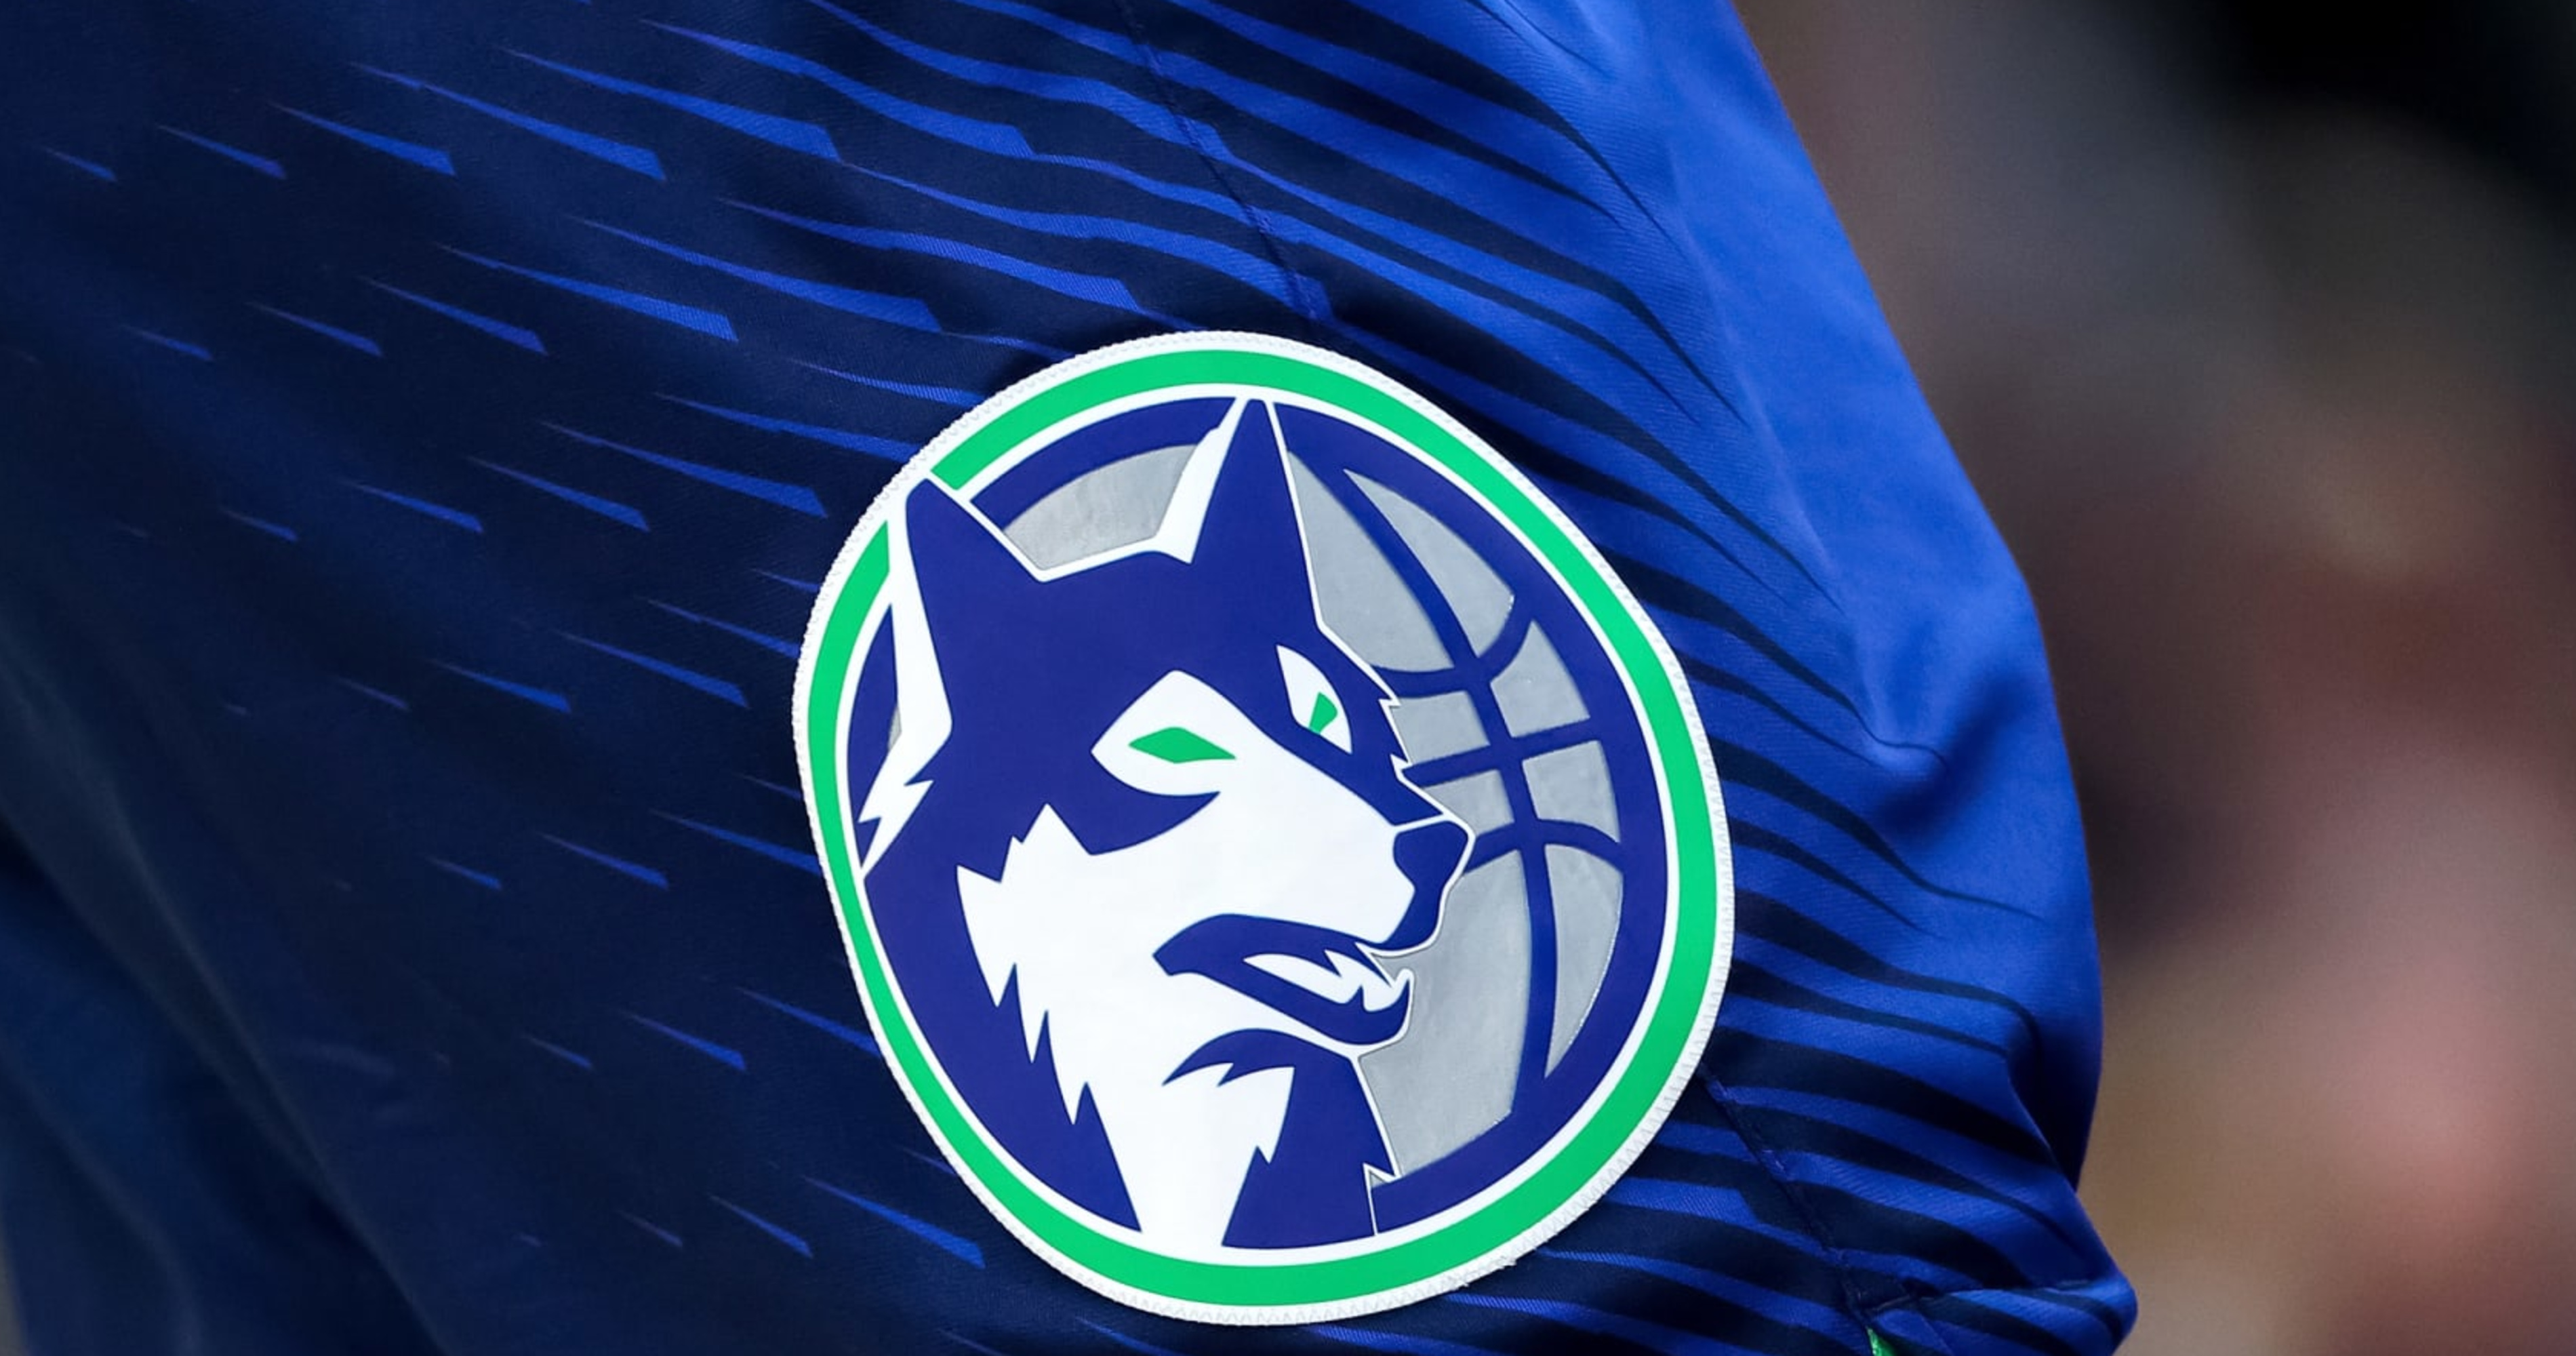 Timberwolves bringing back 'Old Shep' logo with retro jerseys and court for  35th anniversary season – Twin Cities